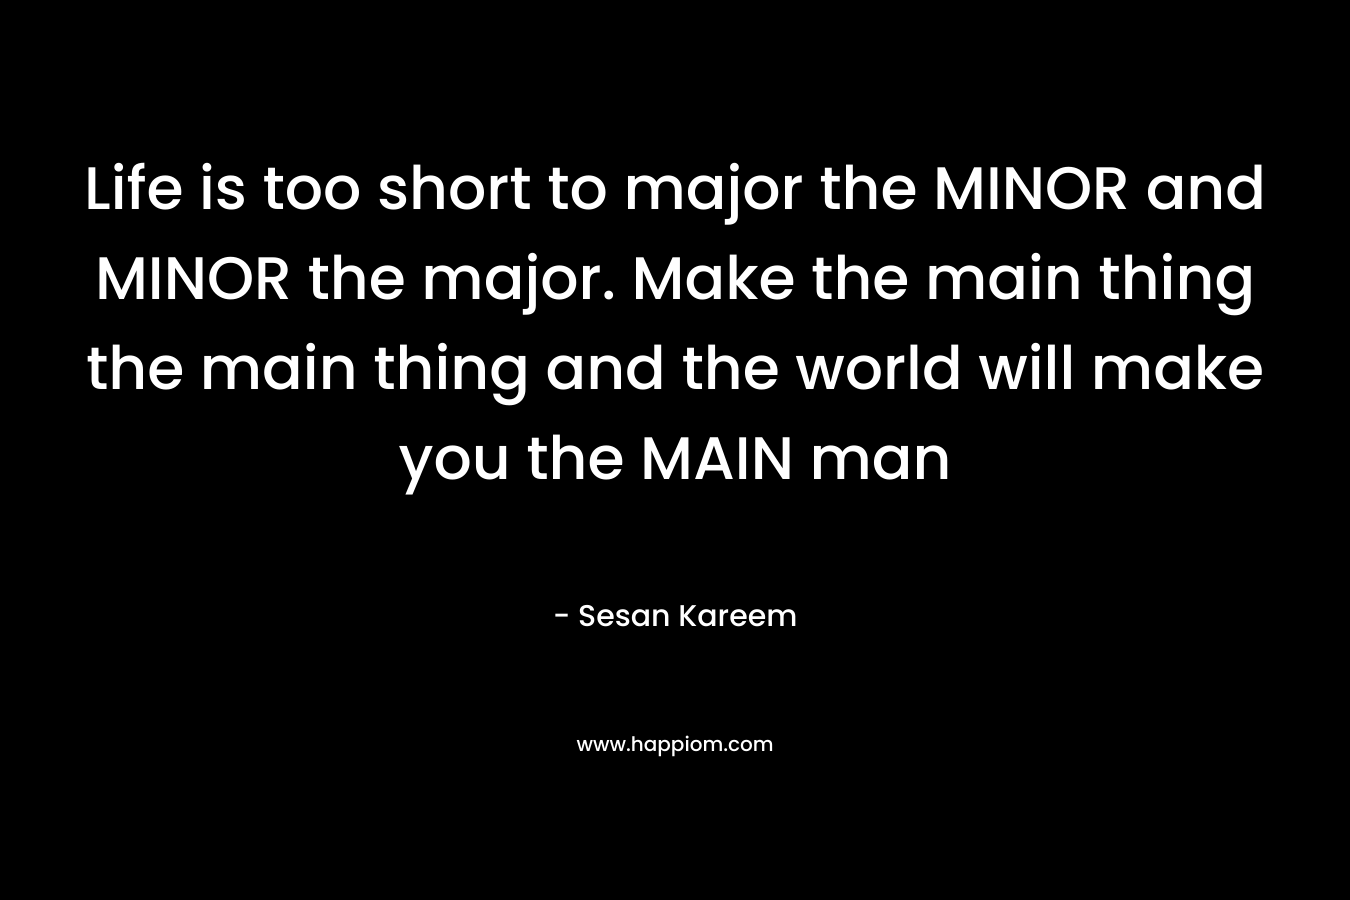 Life is too short to major the MINOR and MINOR the major. Make the main thing the main thing and the world will make you the MAIN man – Sesan Kareem